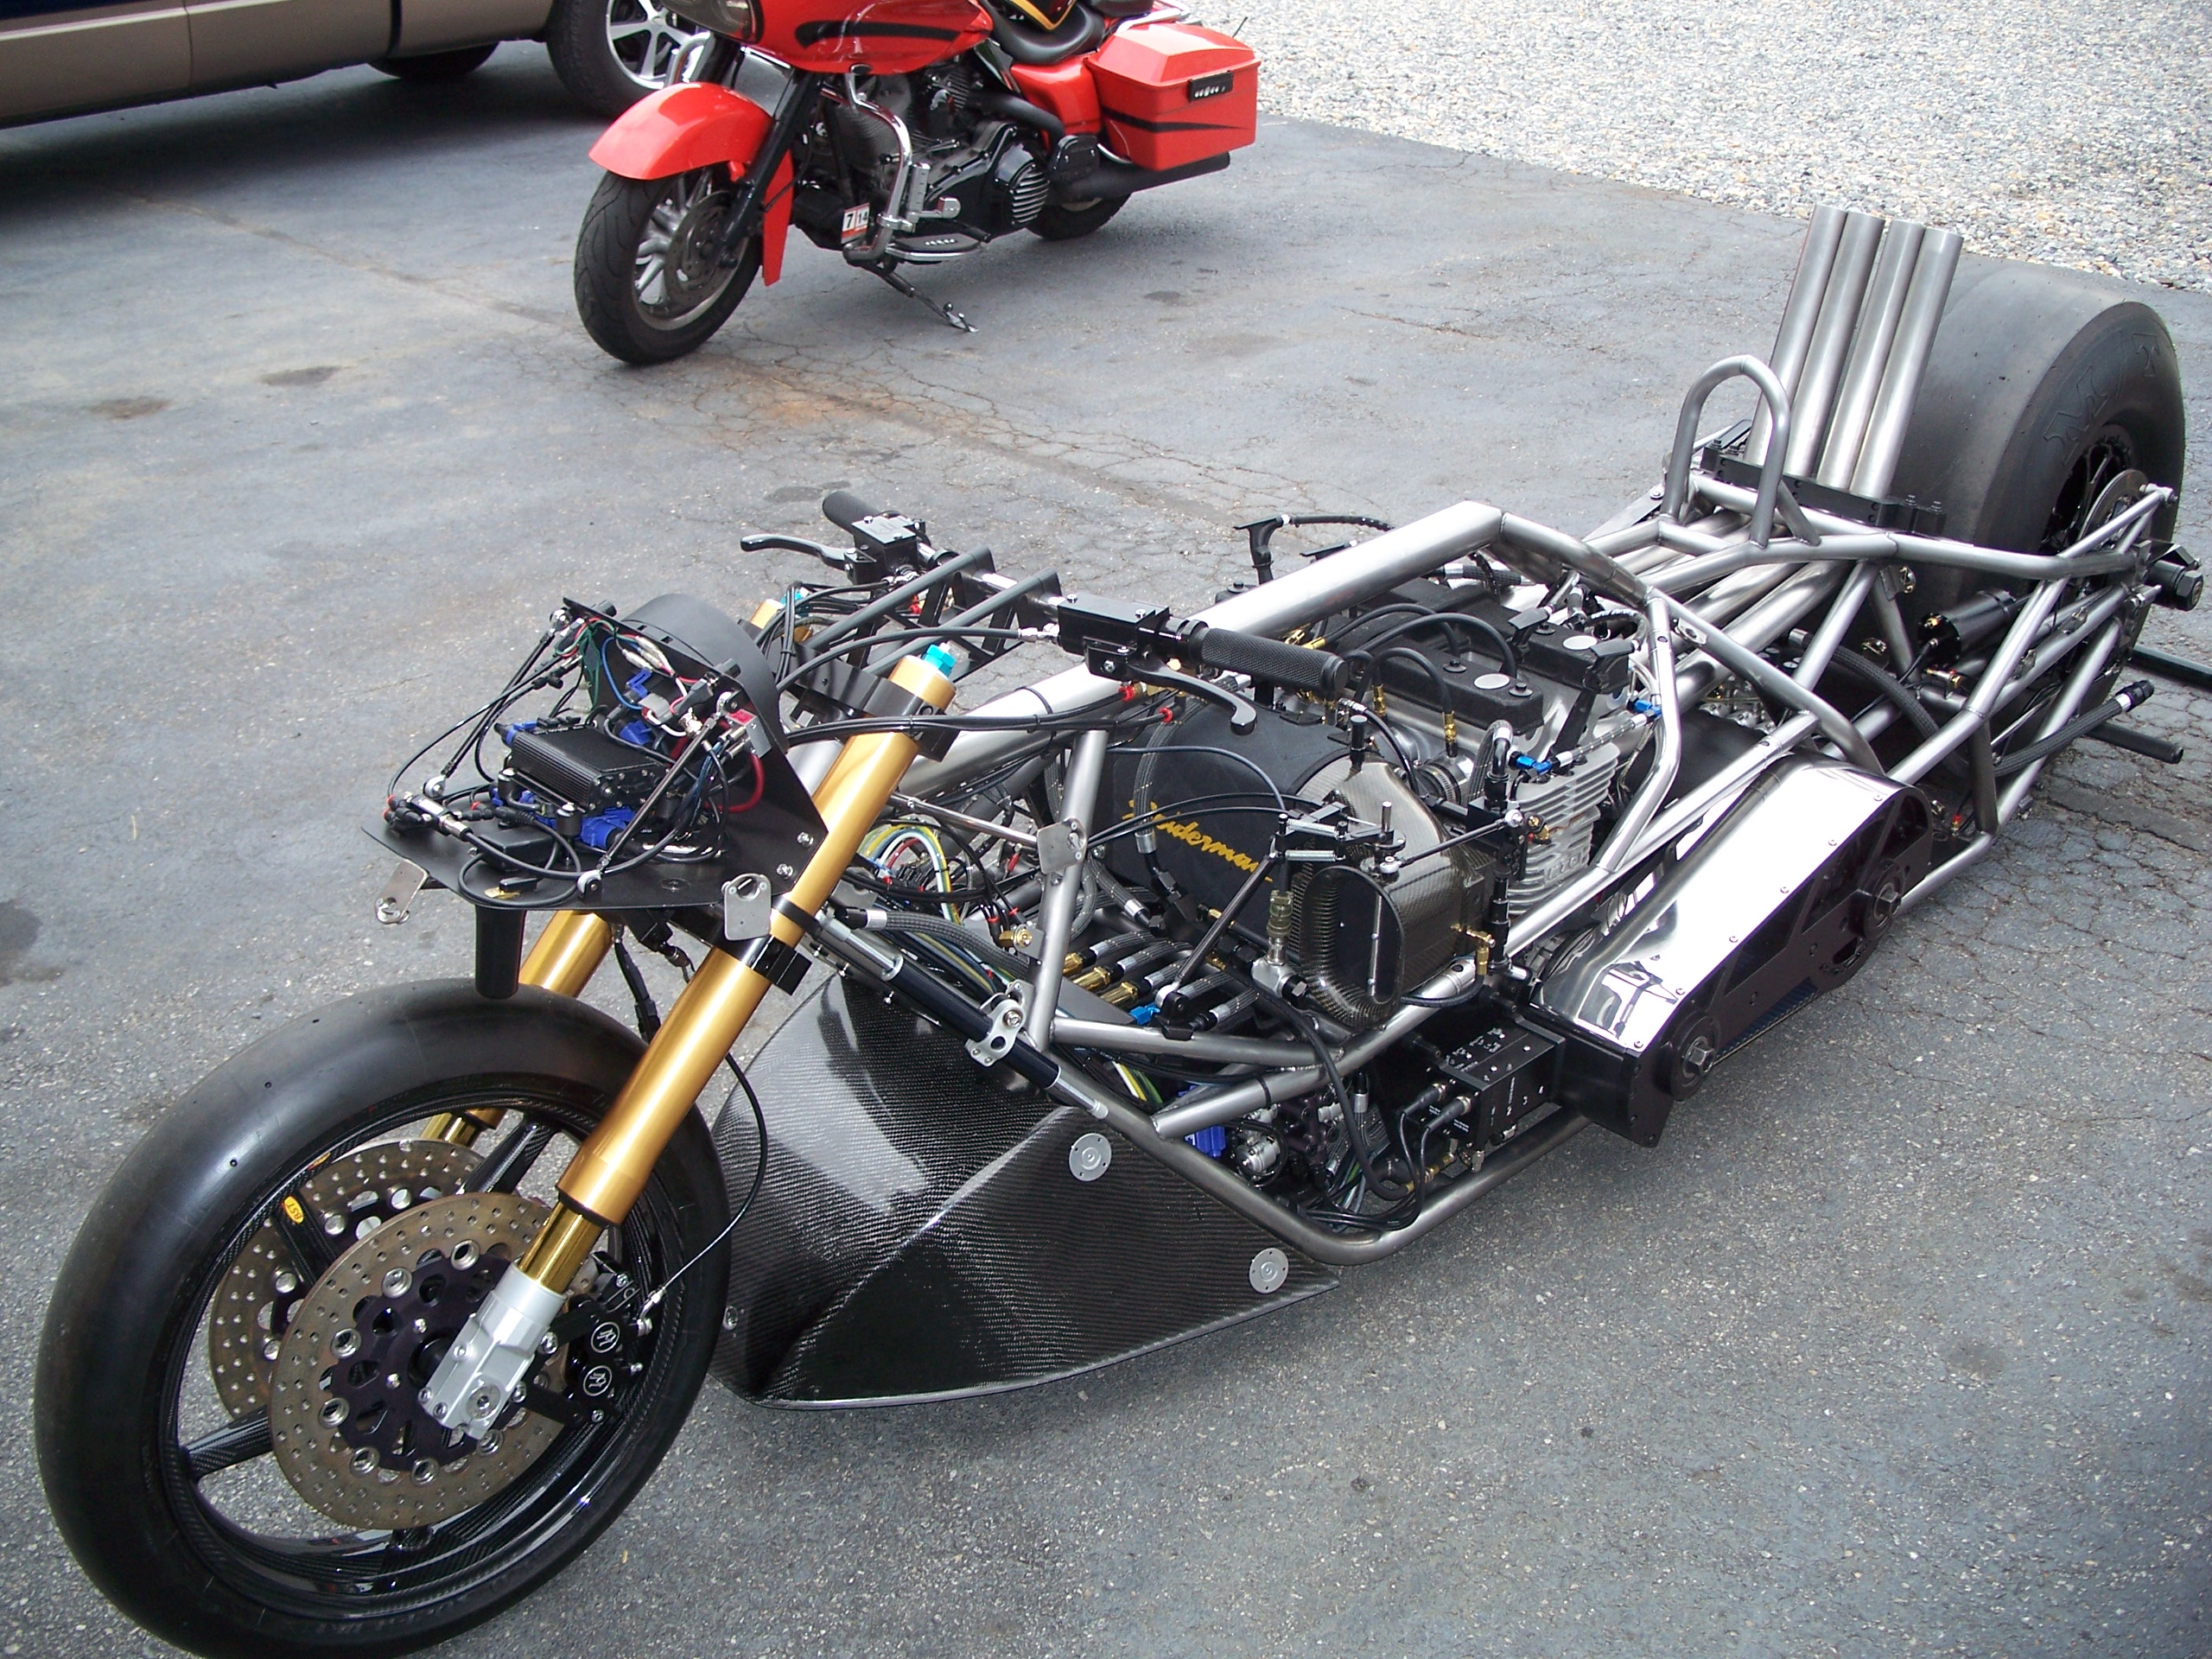 Larry “Spiderman” McBride’s New Top Fuel Dragbike Comes to Life Drag